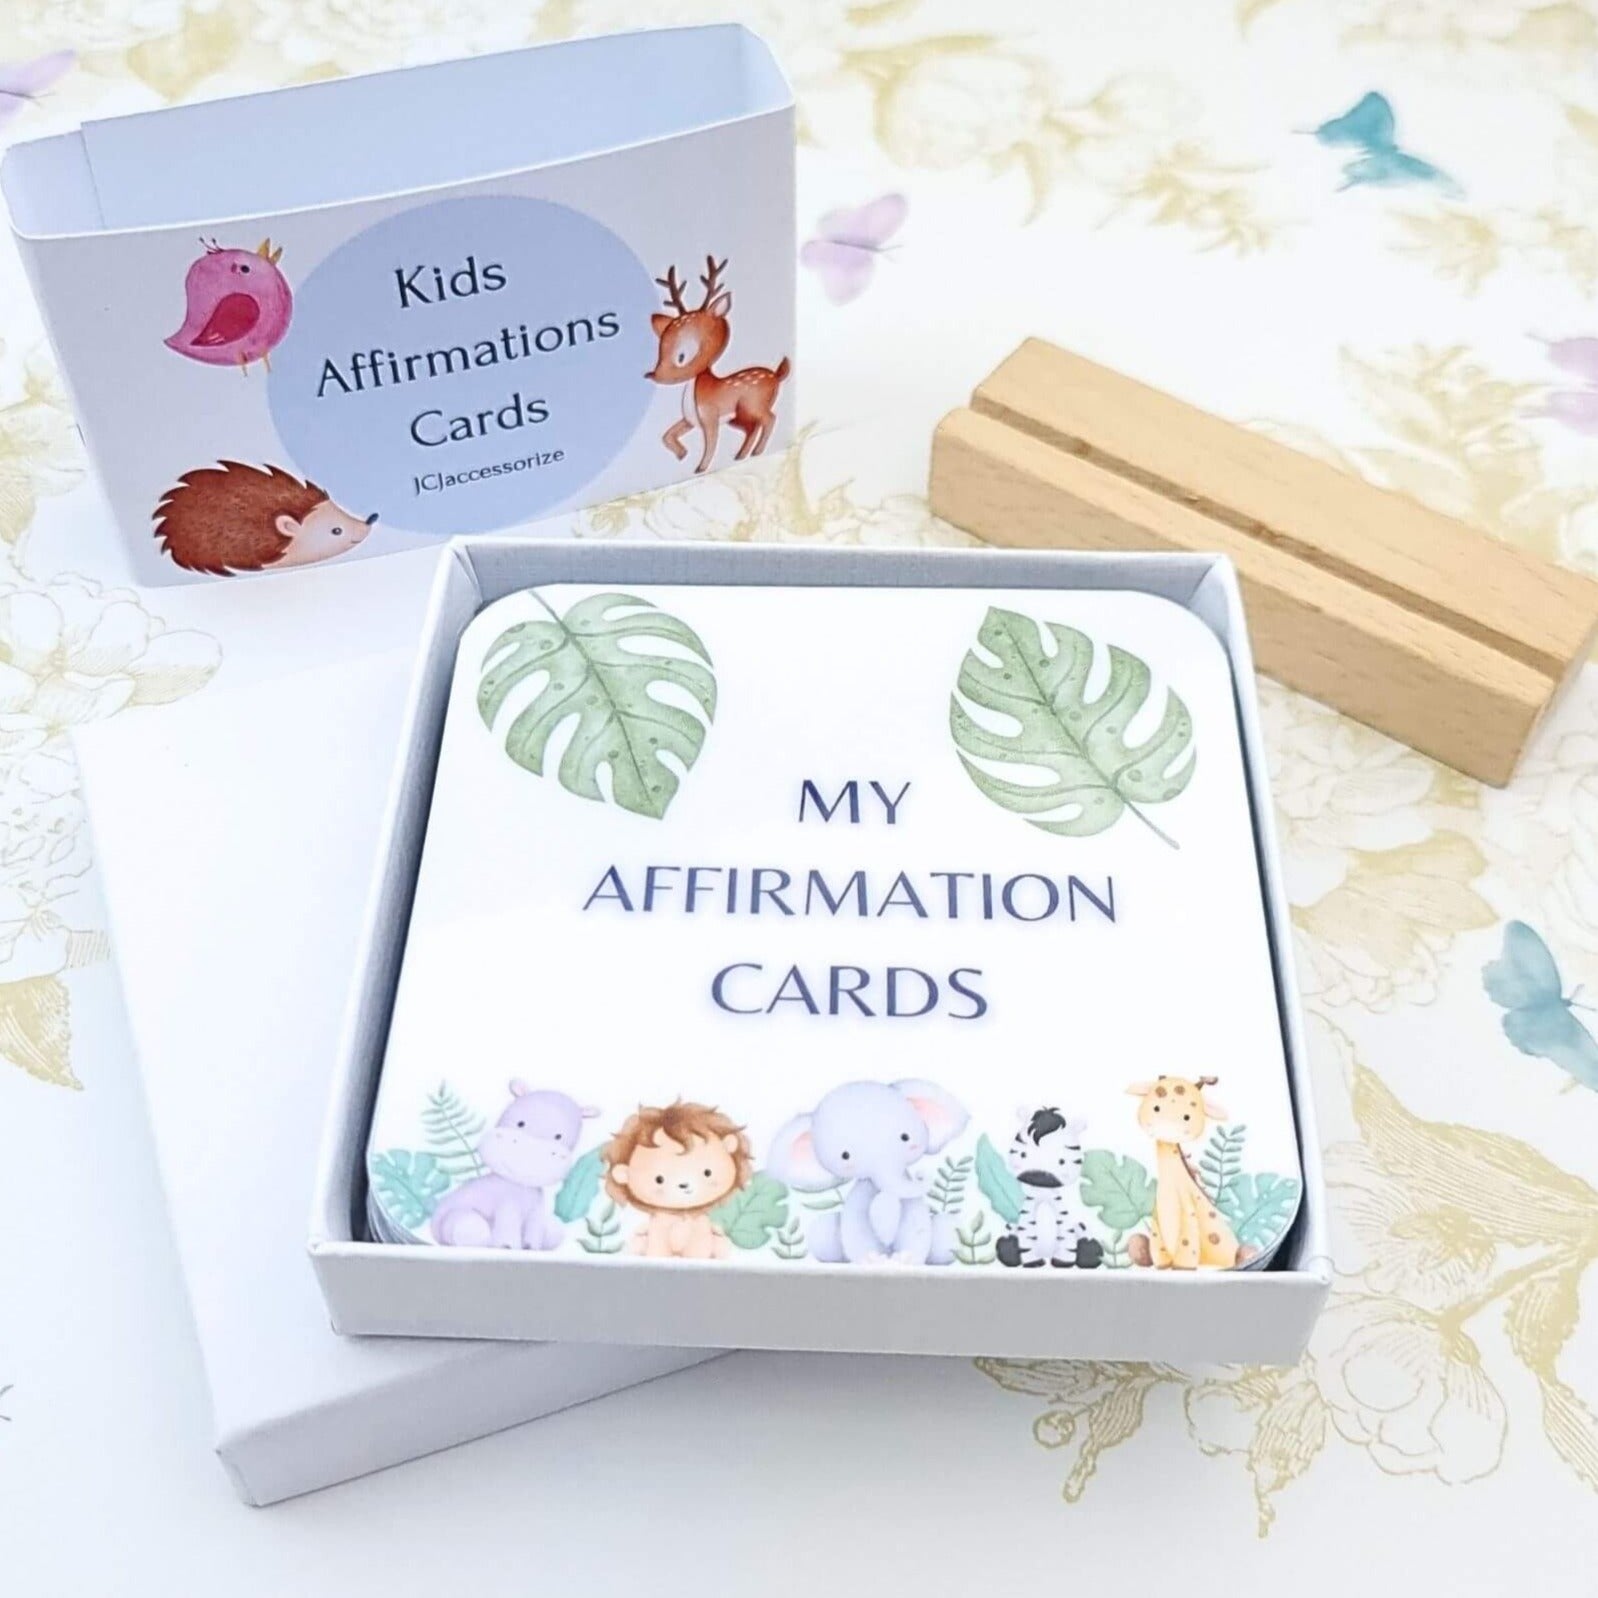 affirmation cards for kids with gift box and card holder